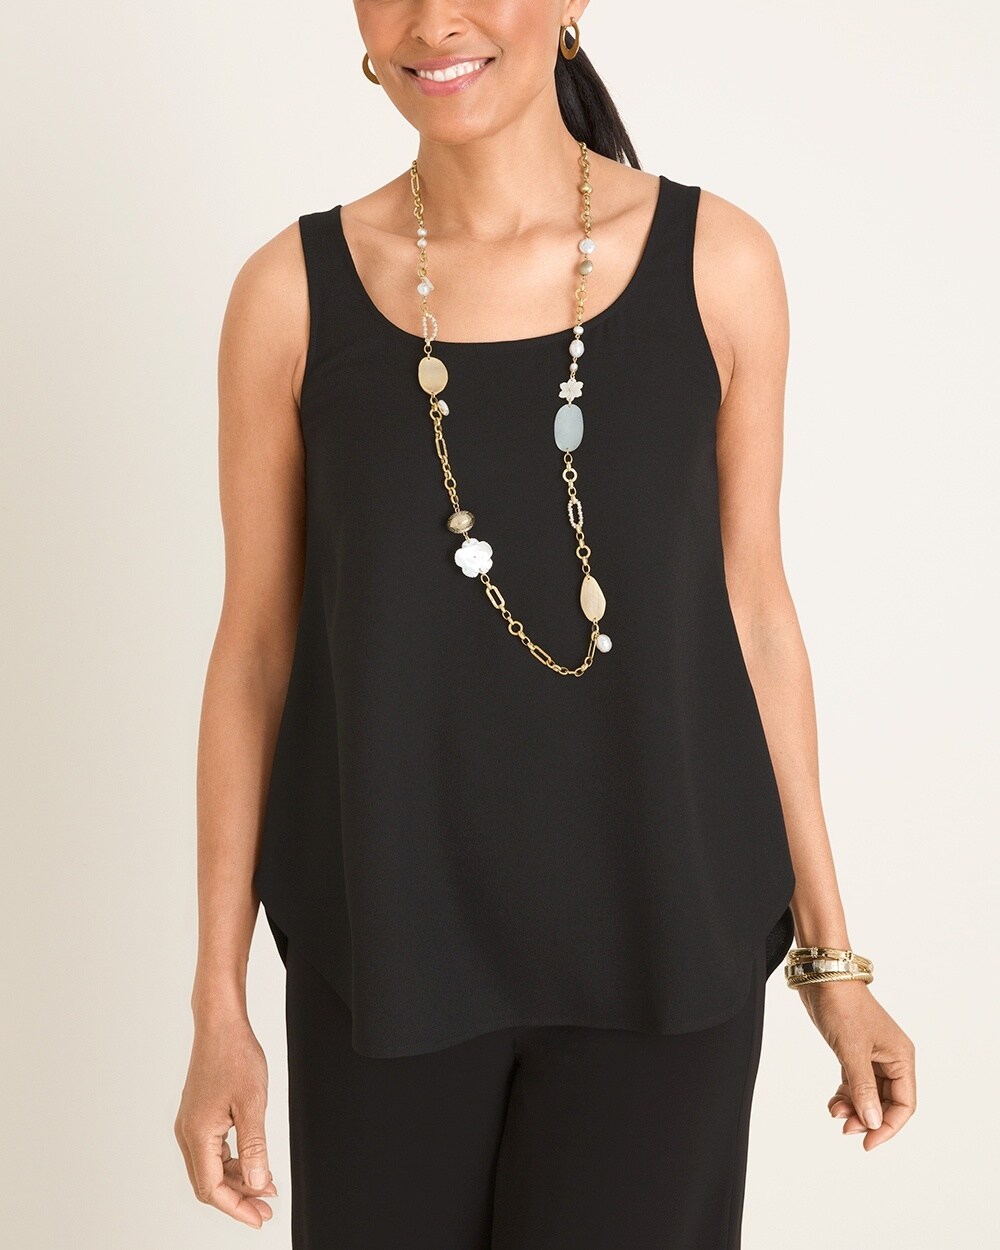 Marla Wynne for Chico's Crepe Tank